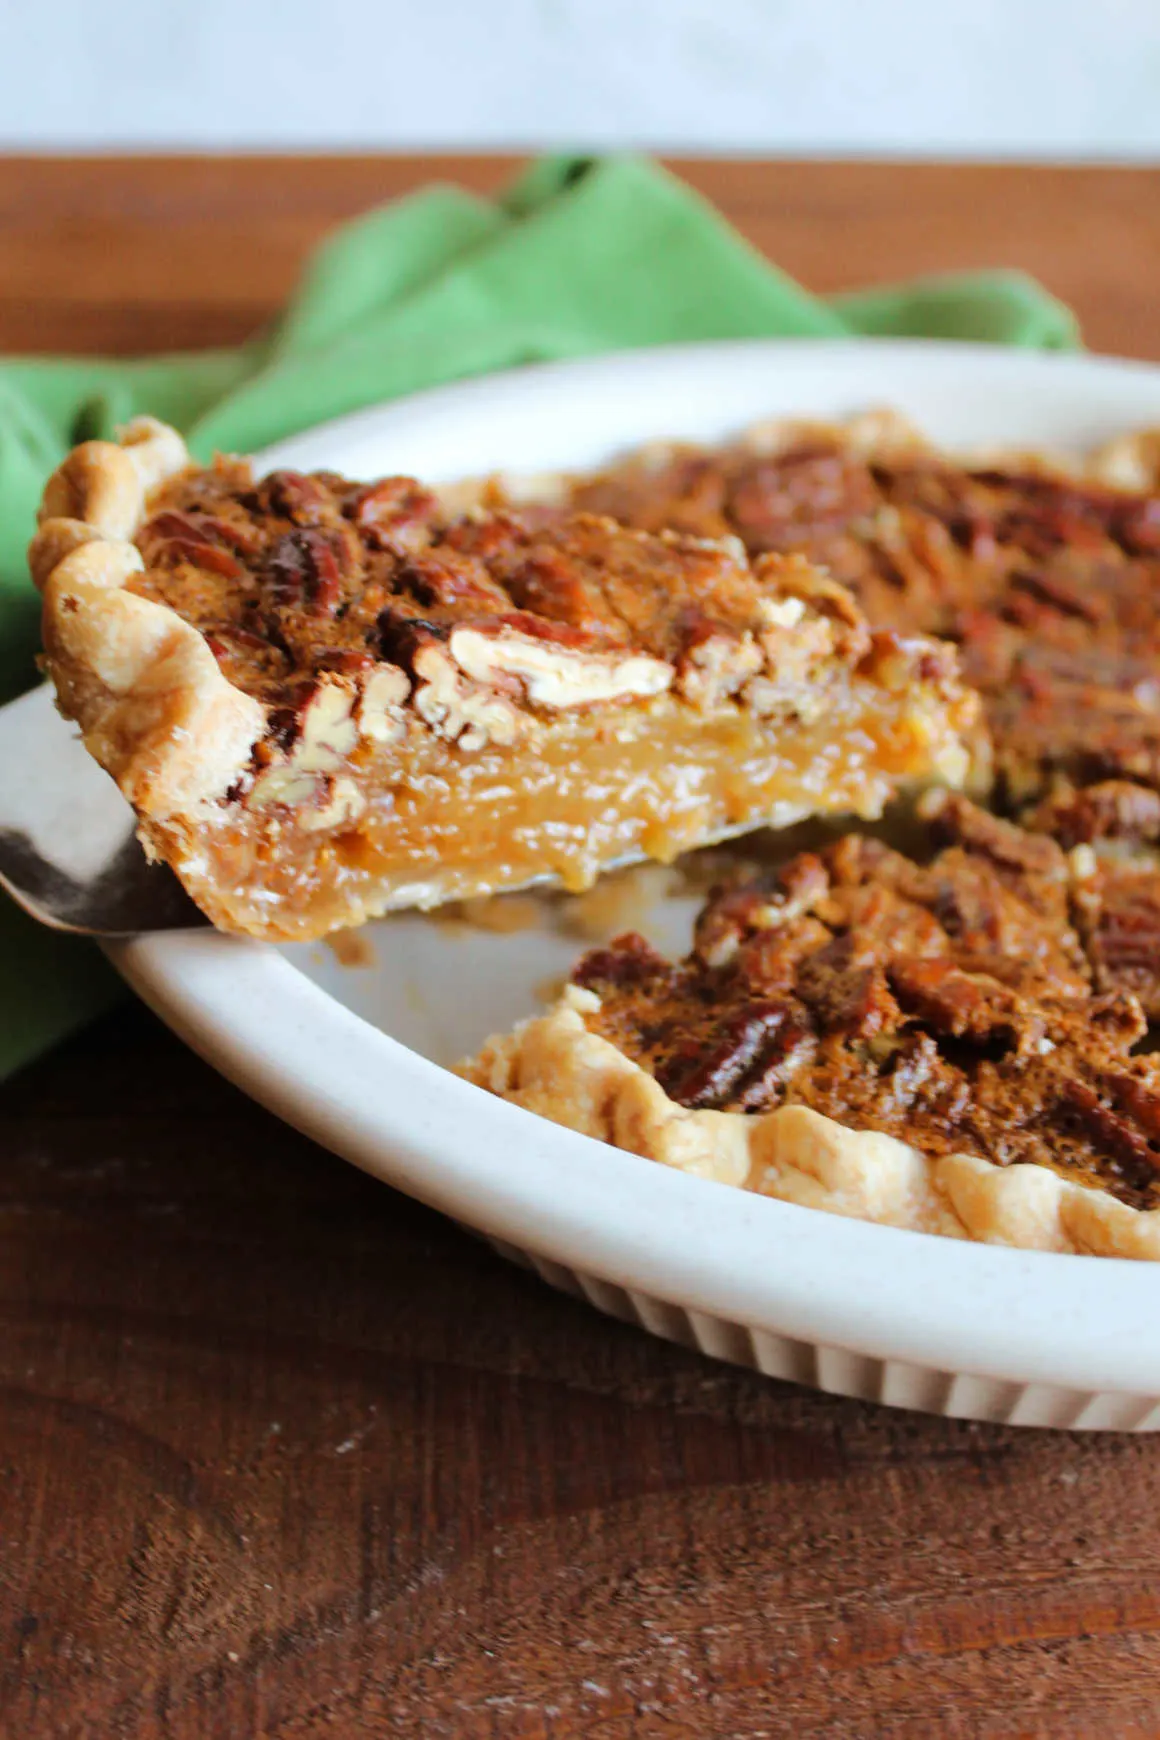 Pie serving lifting out slice of classic pecan pie with gooey filling and lots of rich pecans on top.